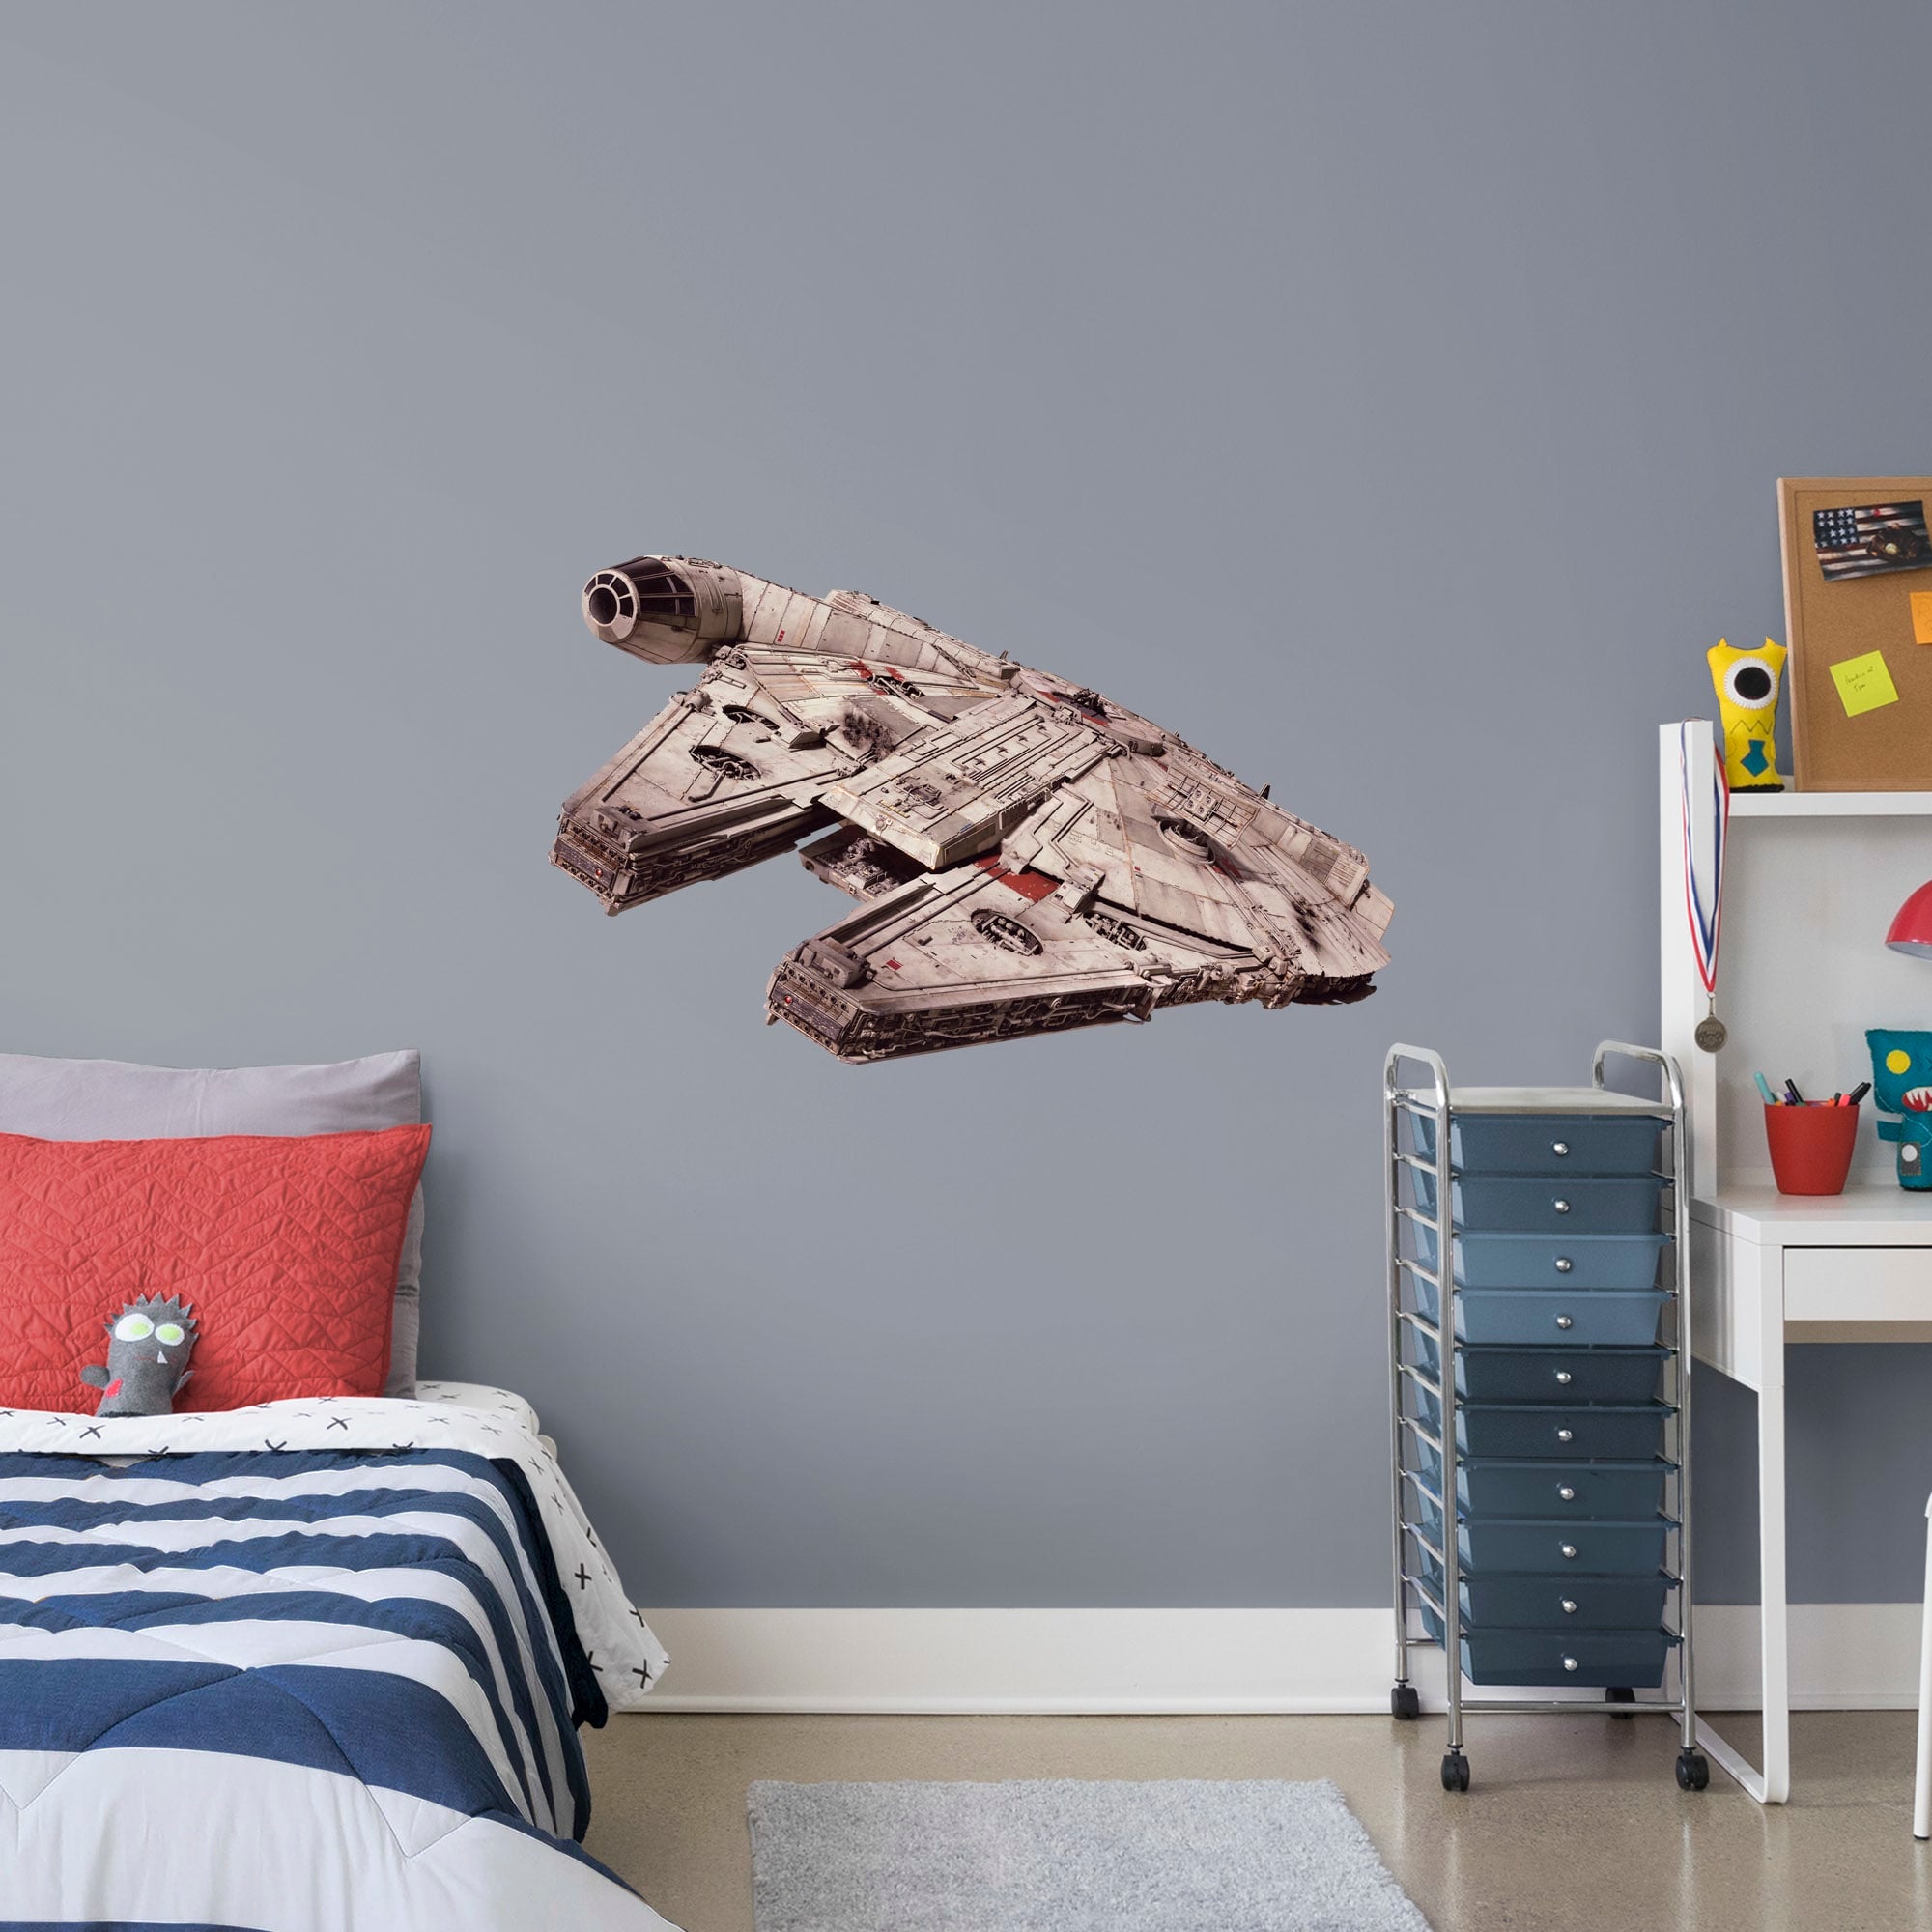 Millennium Falcon - Star Wars: The Force Awakens - Officially Licensed Removable Wall Decal Giant Ship + 2 Decals (51"W x 31"H)